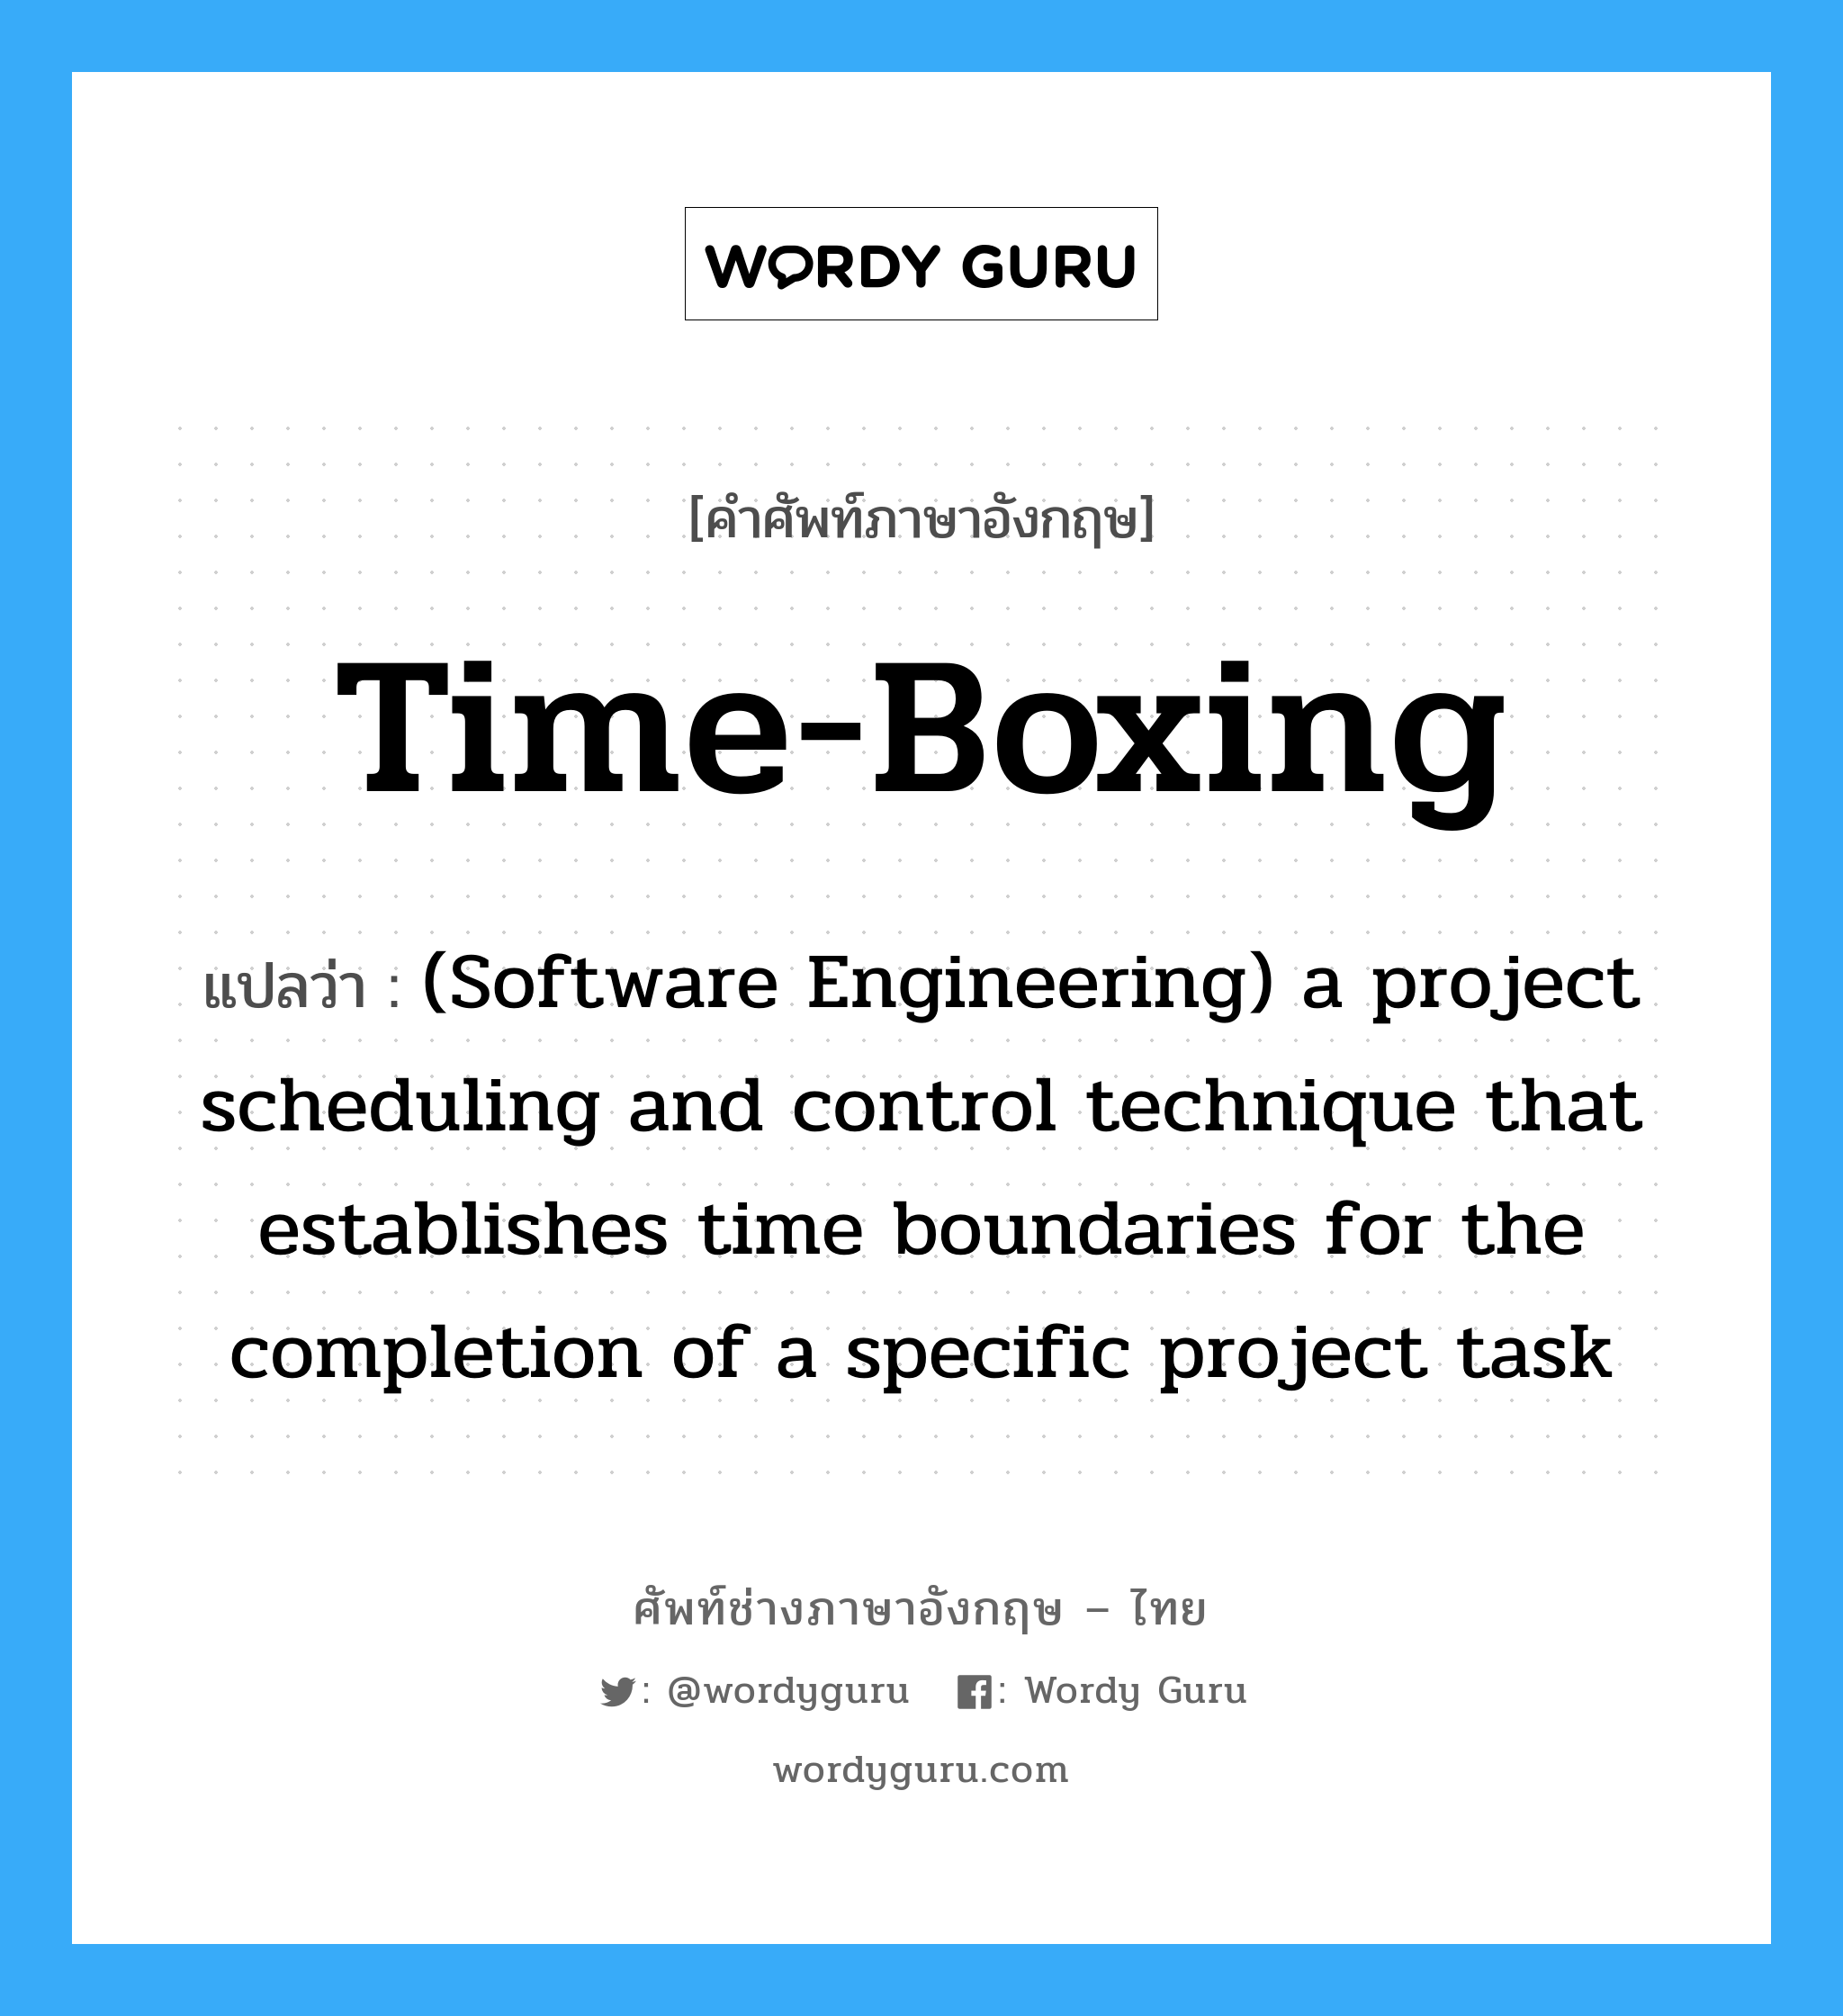 Time-boxing แปลว่า?, คำศัพท์ช่างภาษาอังกฤษ - ไทย Time-boxing คำศัพท์ภาษาอังกฤษ Time-boxing แปลว่า (Software Engineering) a project scheduling and control technique that establishes time boundaries for the completion of a specific project task